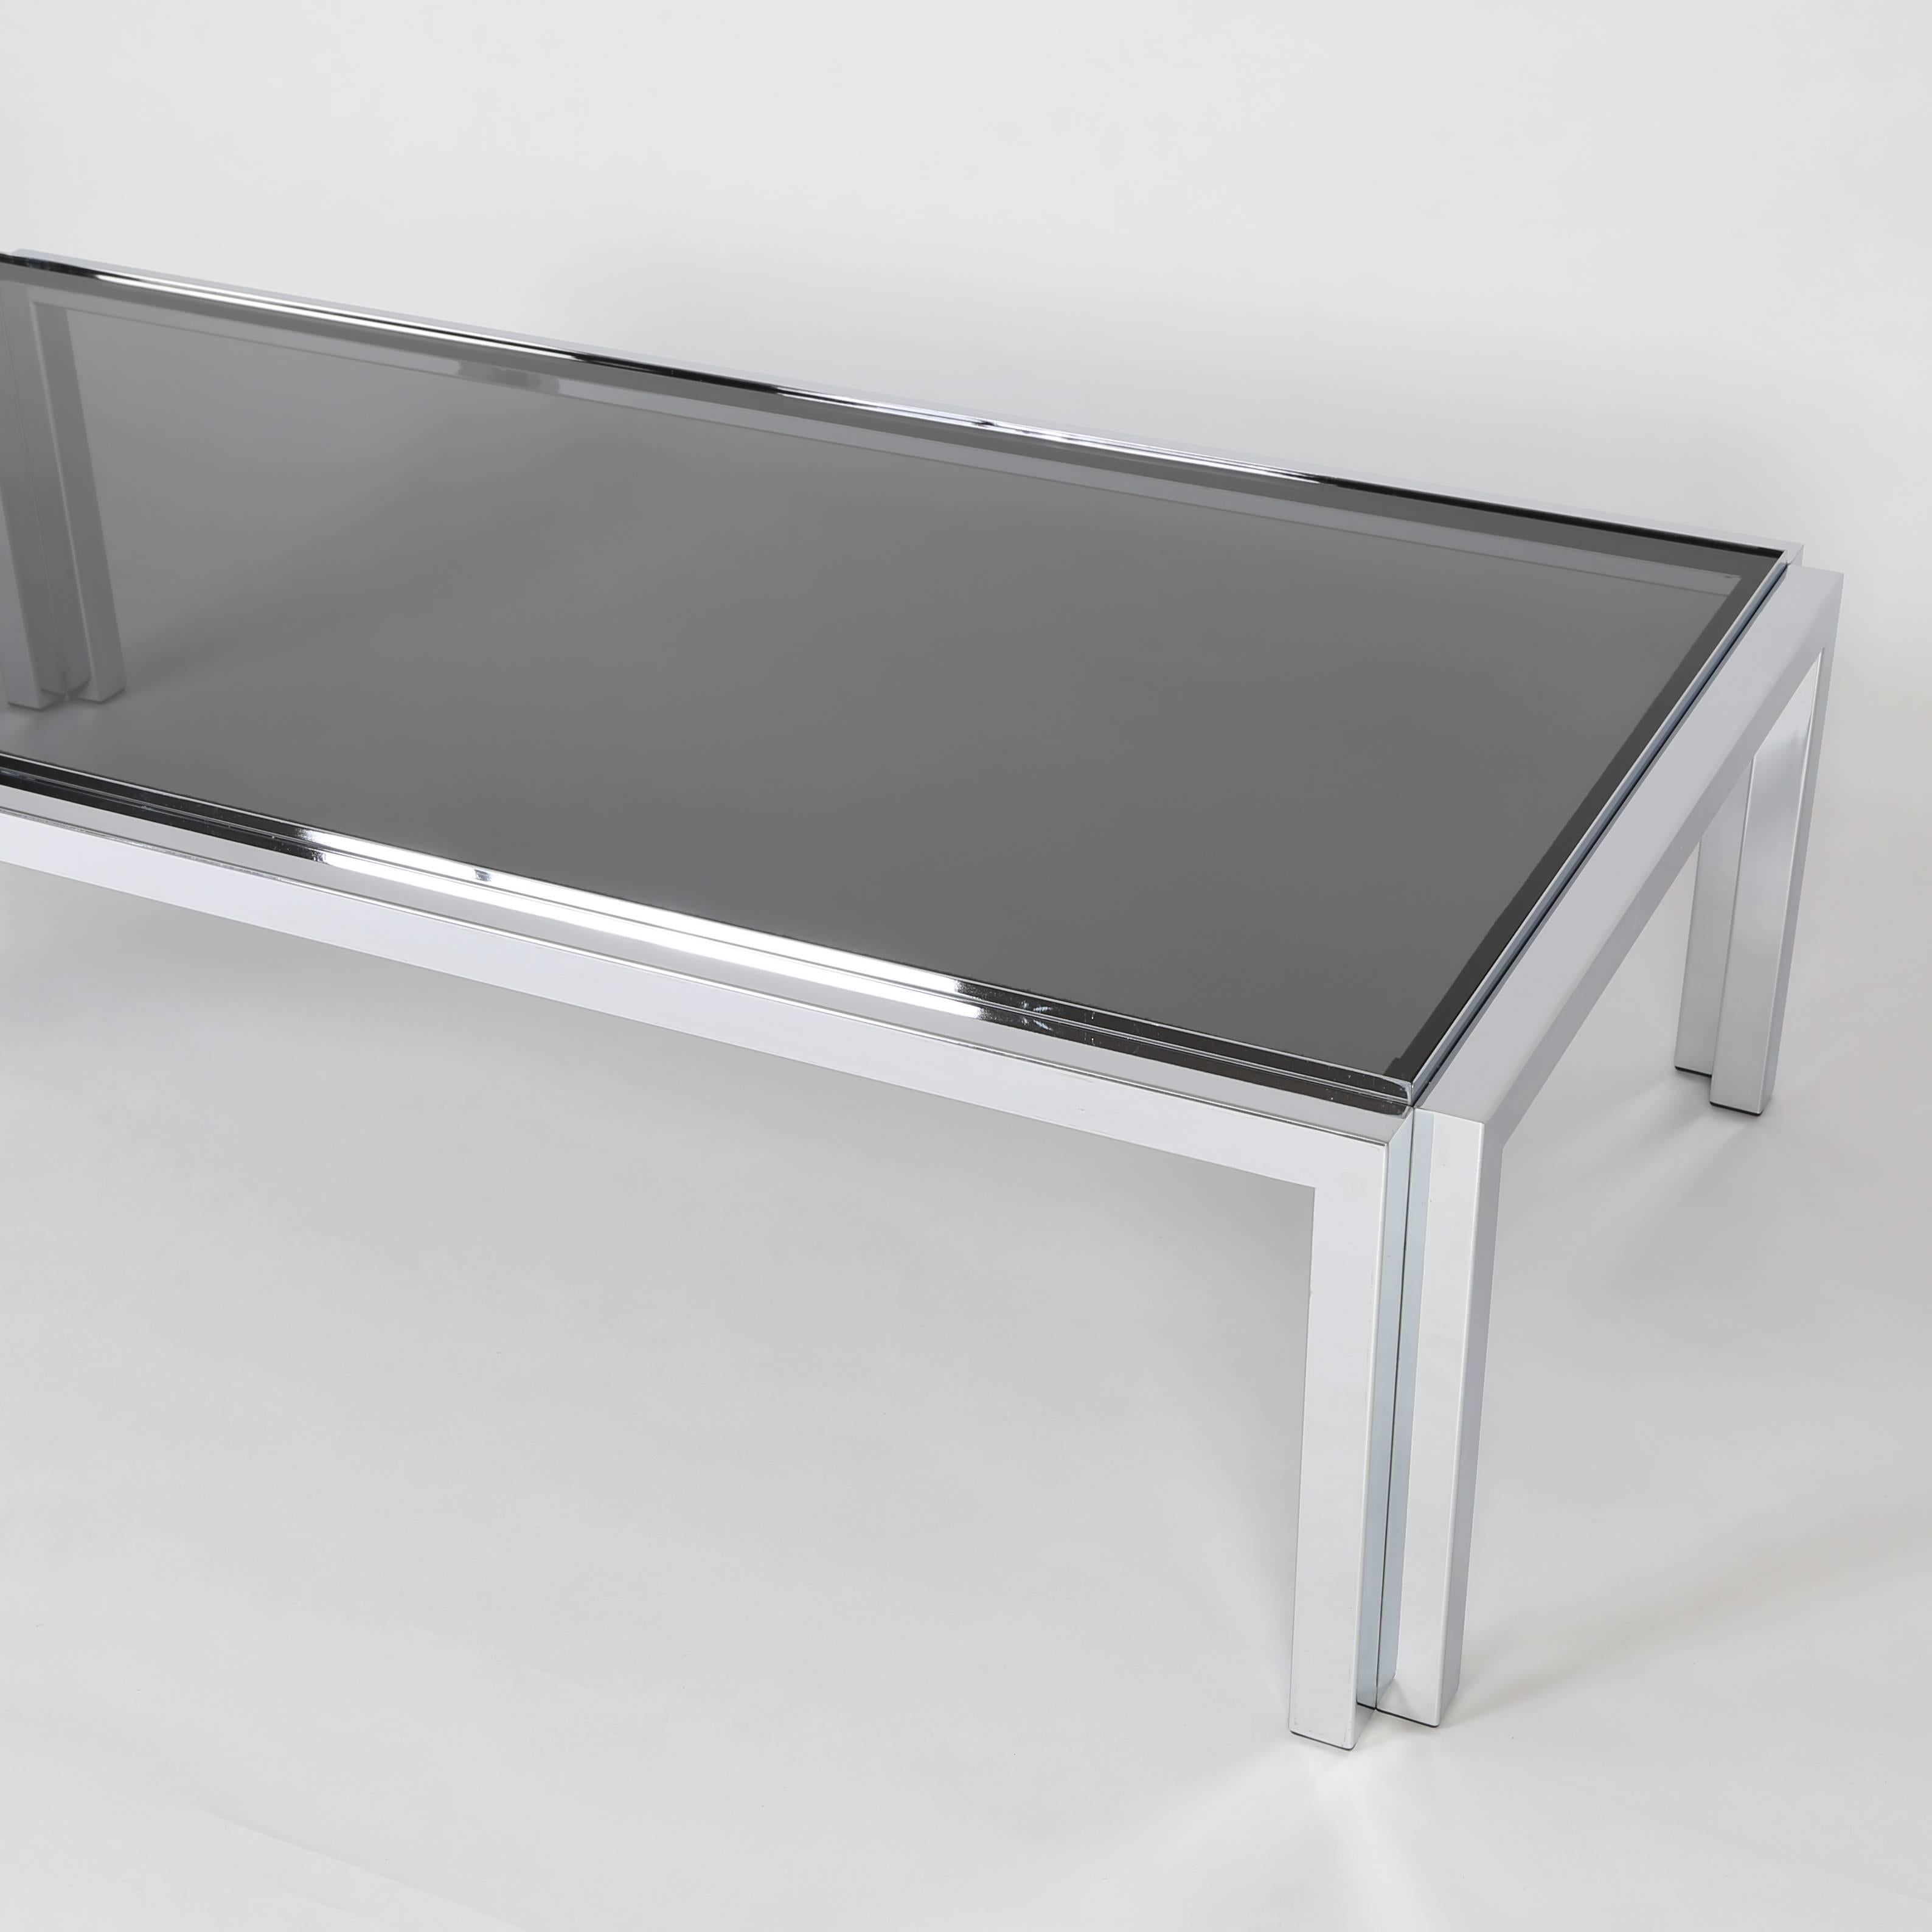 Late 20th Century Rectangular Chrome and Smoked-Glass Coffee Table, circa 1970s For Sale